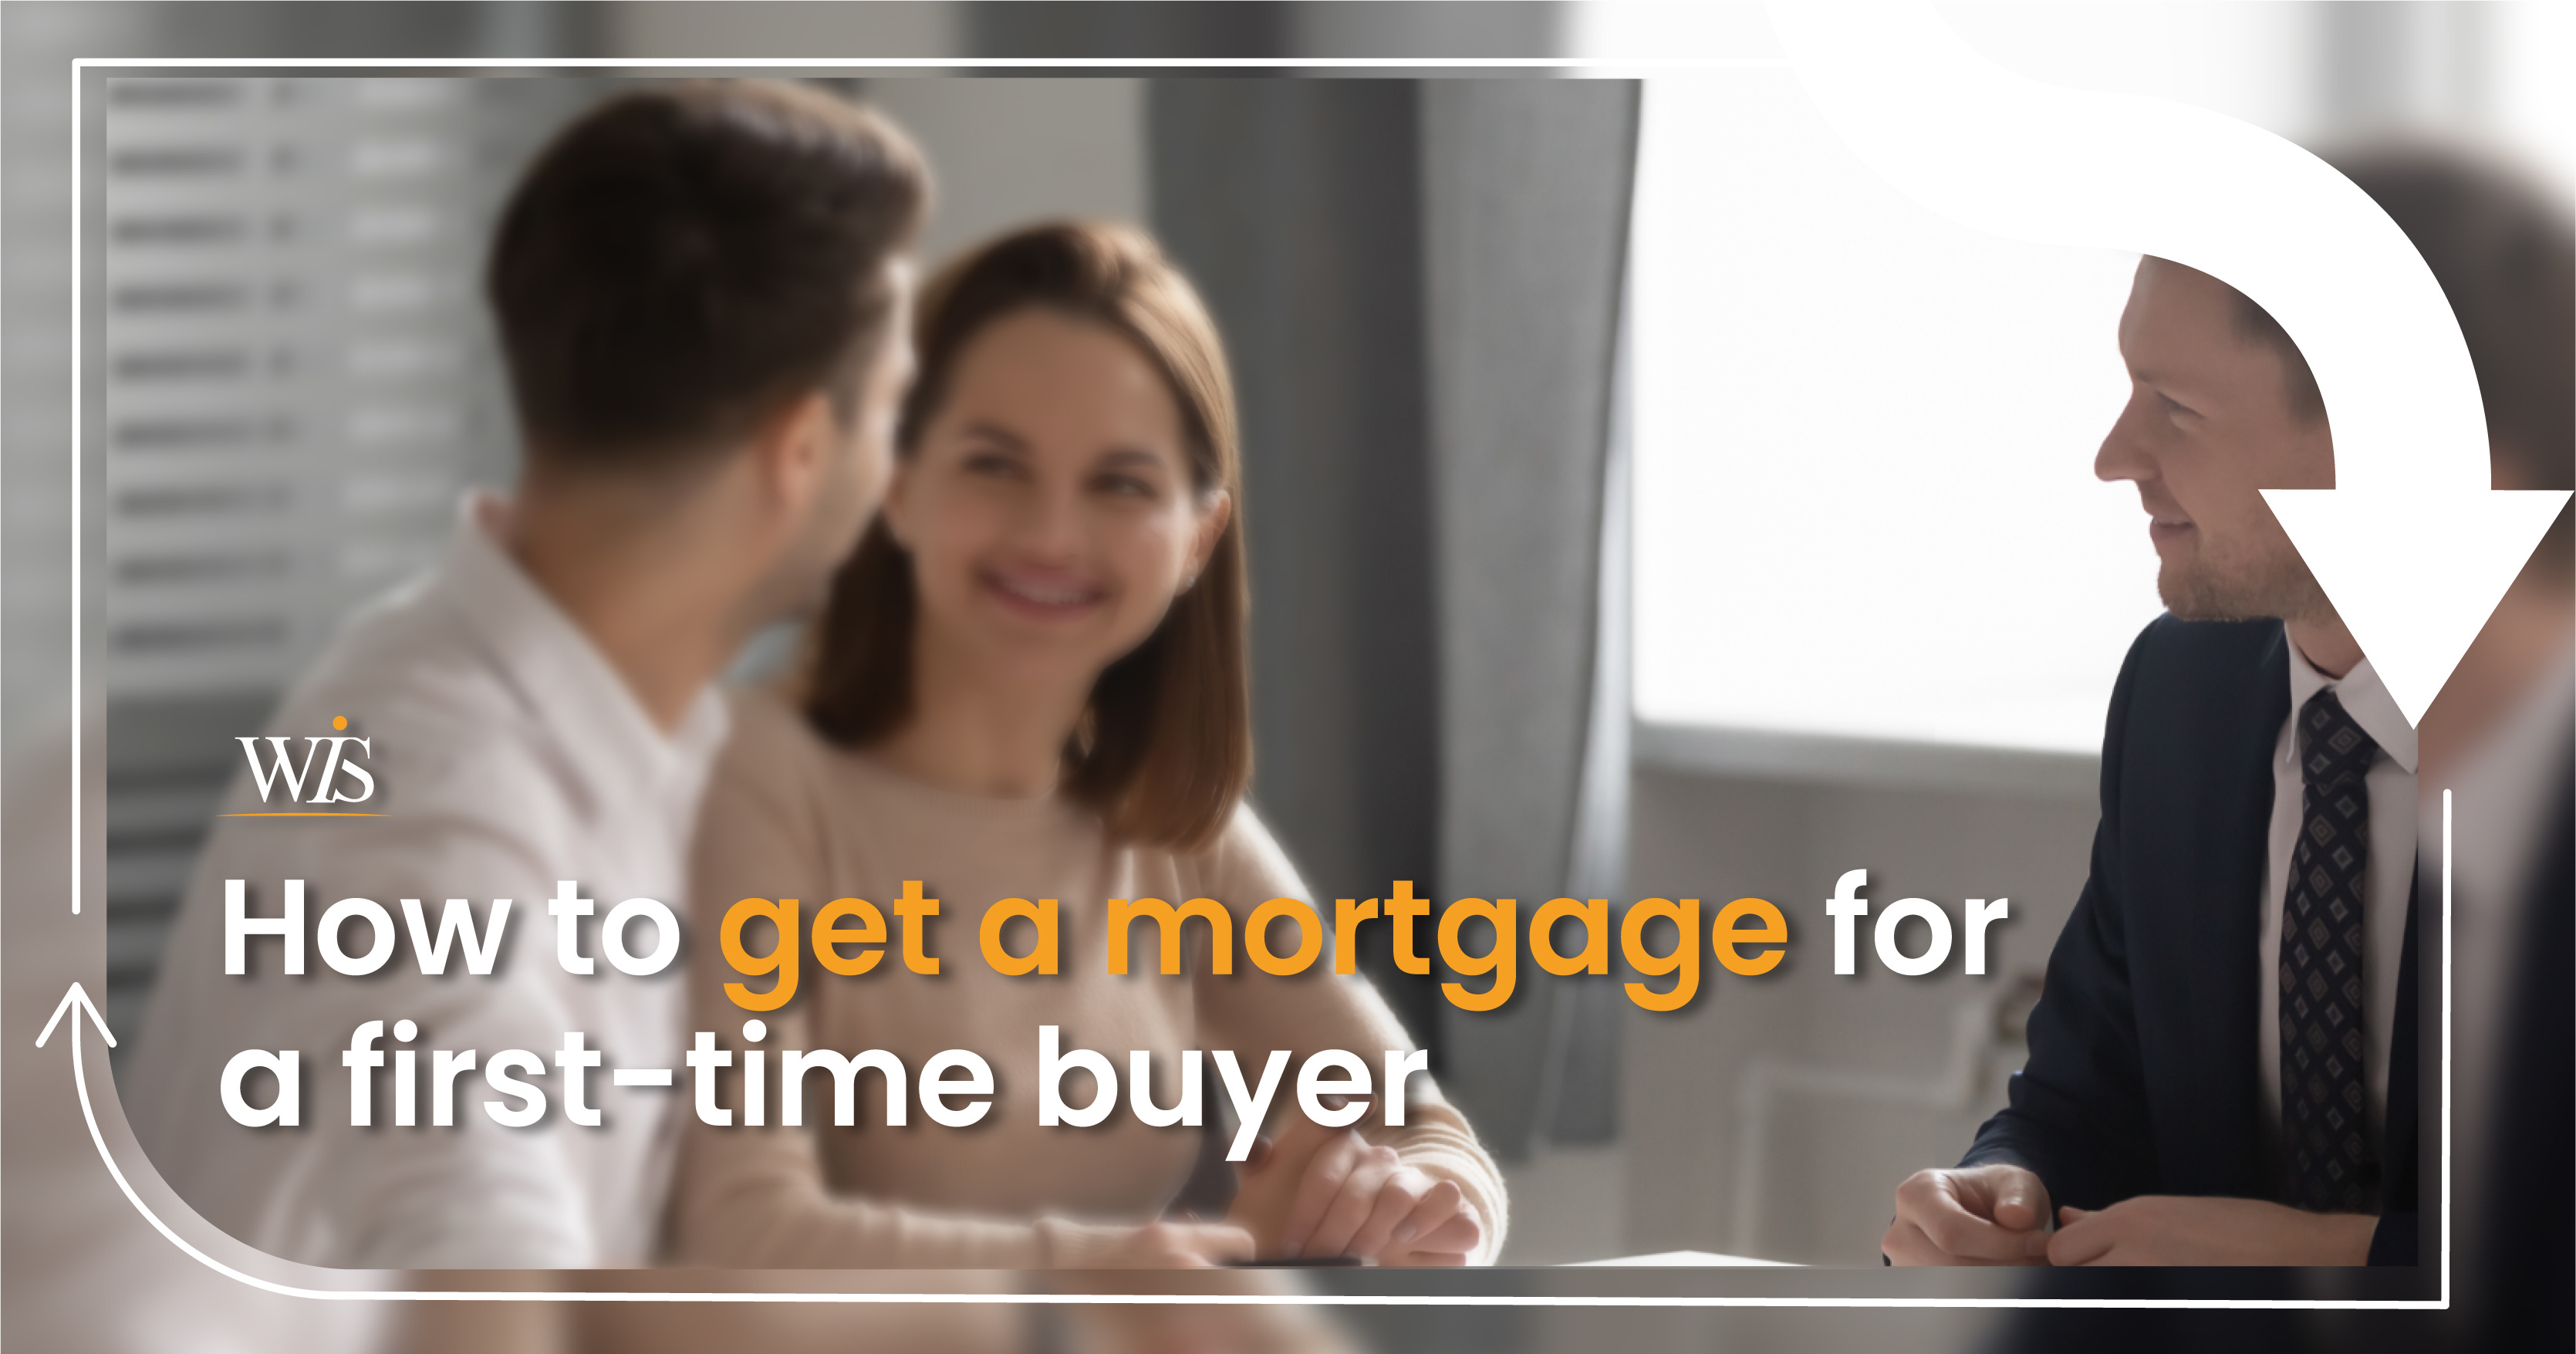 How to get a mortgage for a first-time buyer image